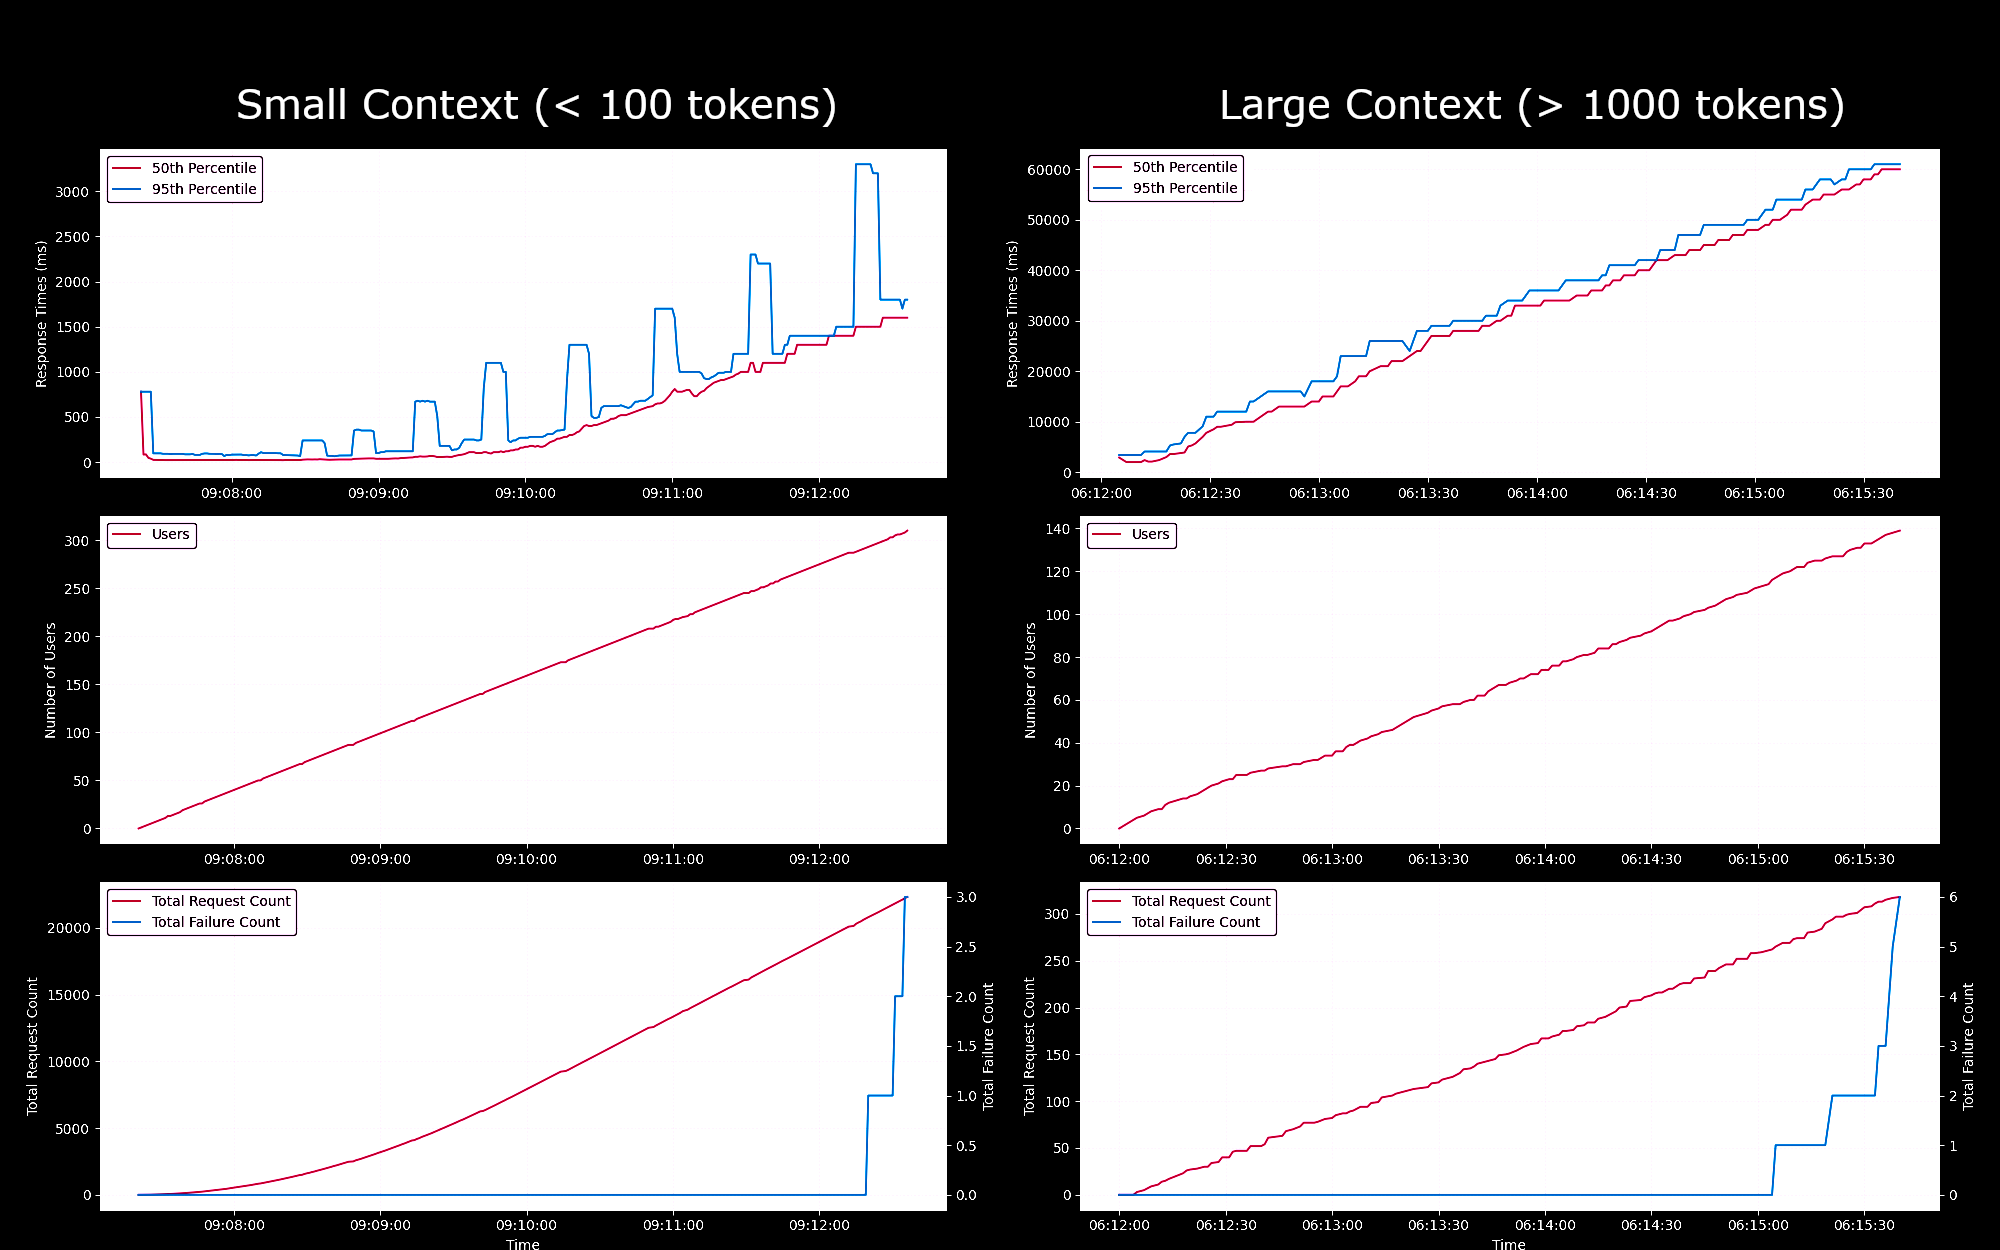 Four comparative graphs displaying "Small Context" versus "Large Context" results over time, assessing performance metrics.